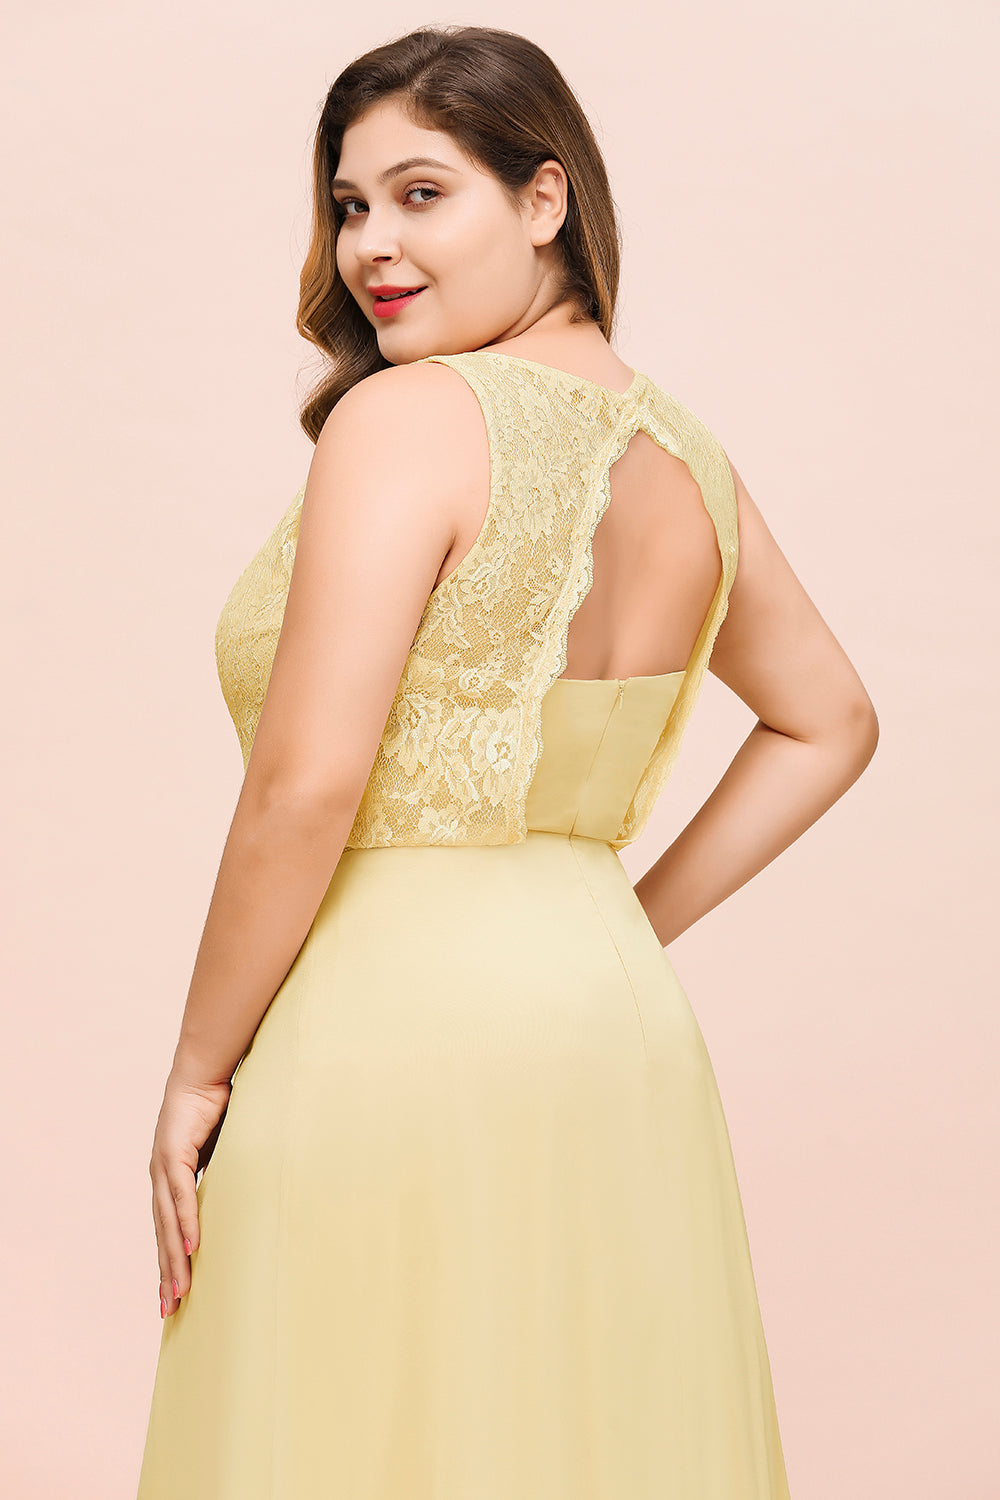 Plus Size Lace Sleeveless Affordable Daffodil Bridesmaid Dress